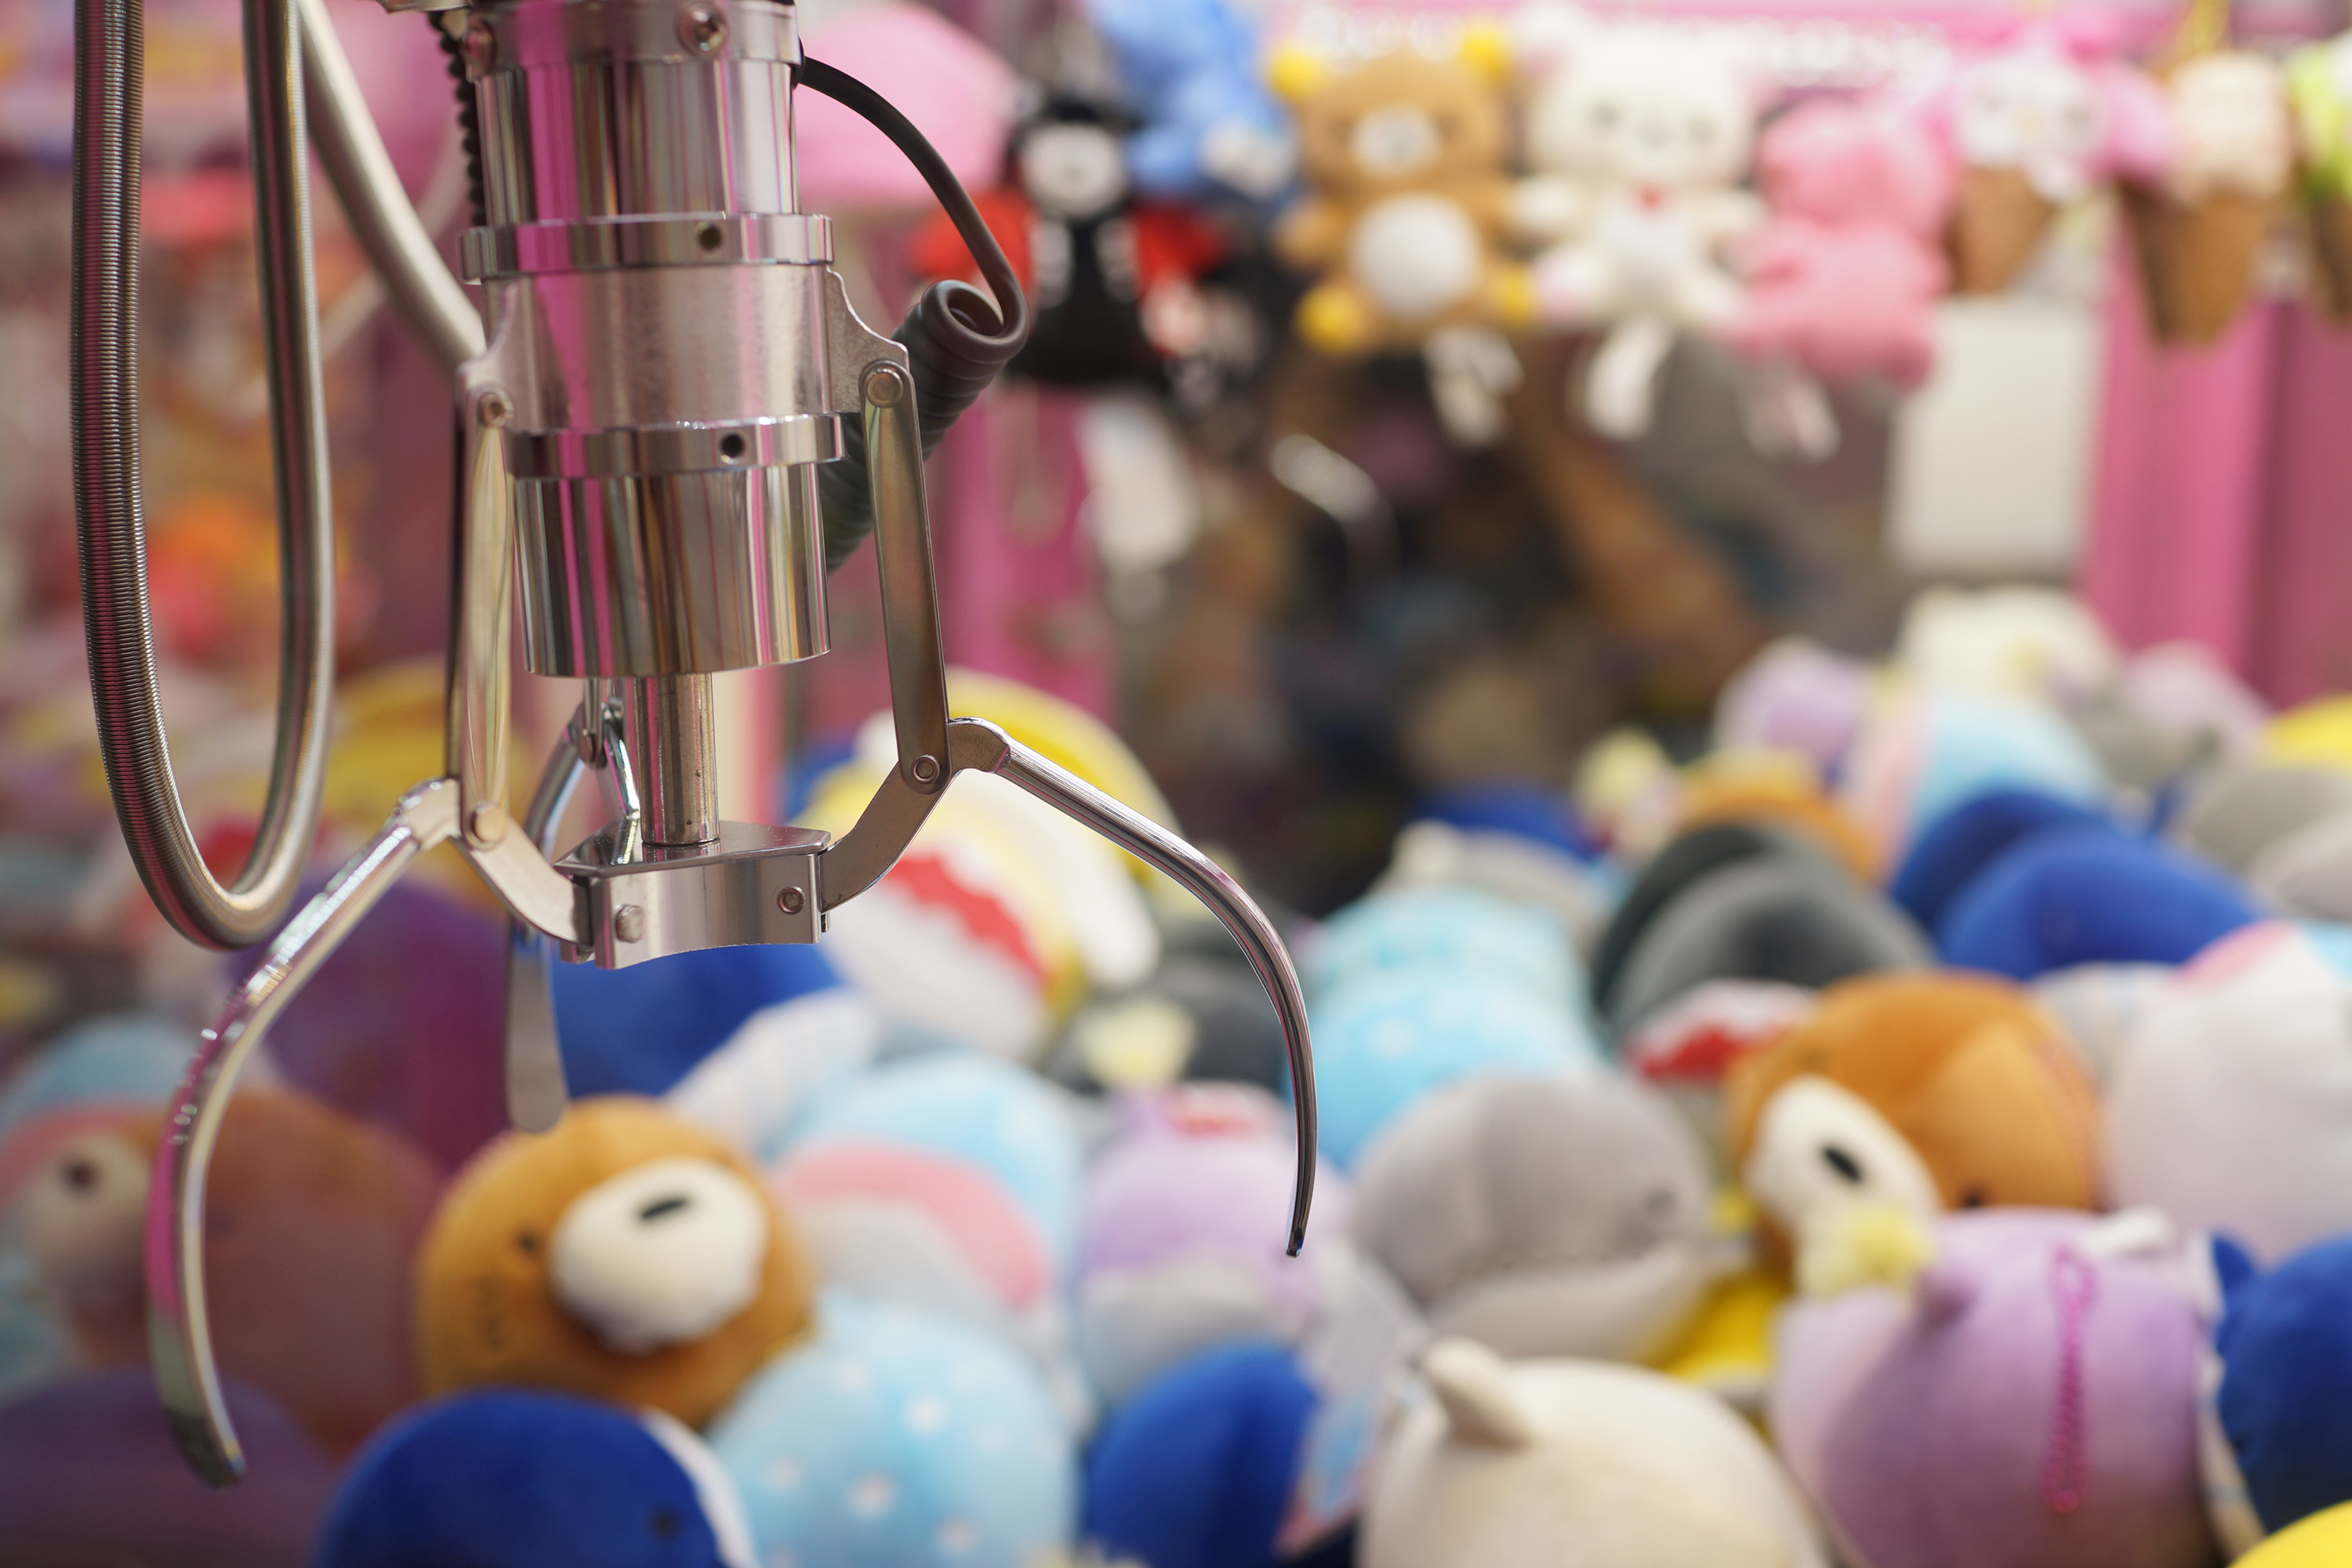 A crane machine filled with plush toys